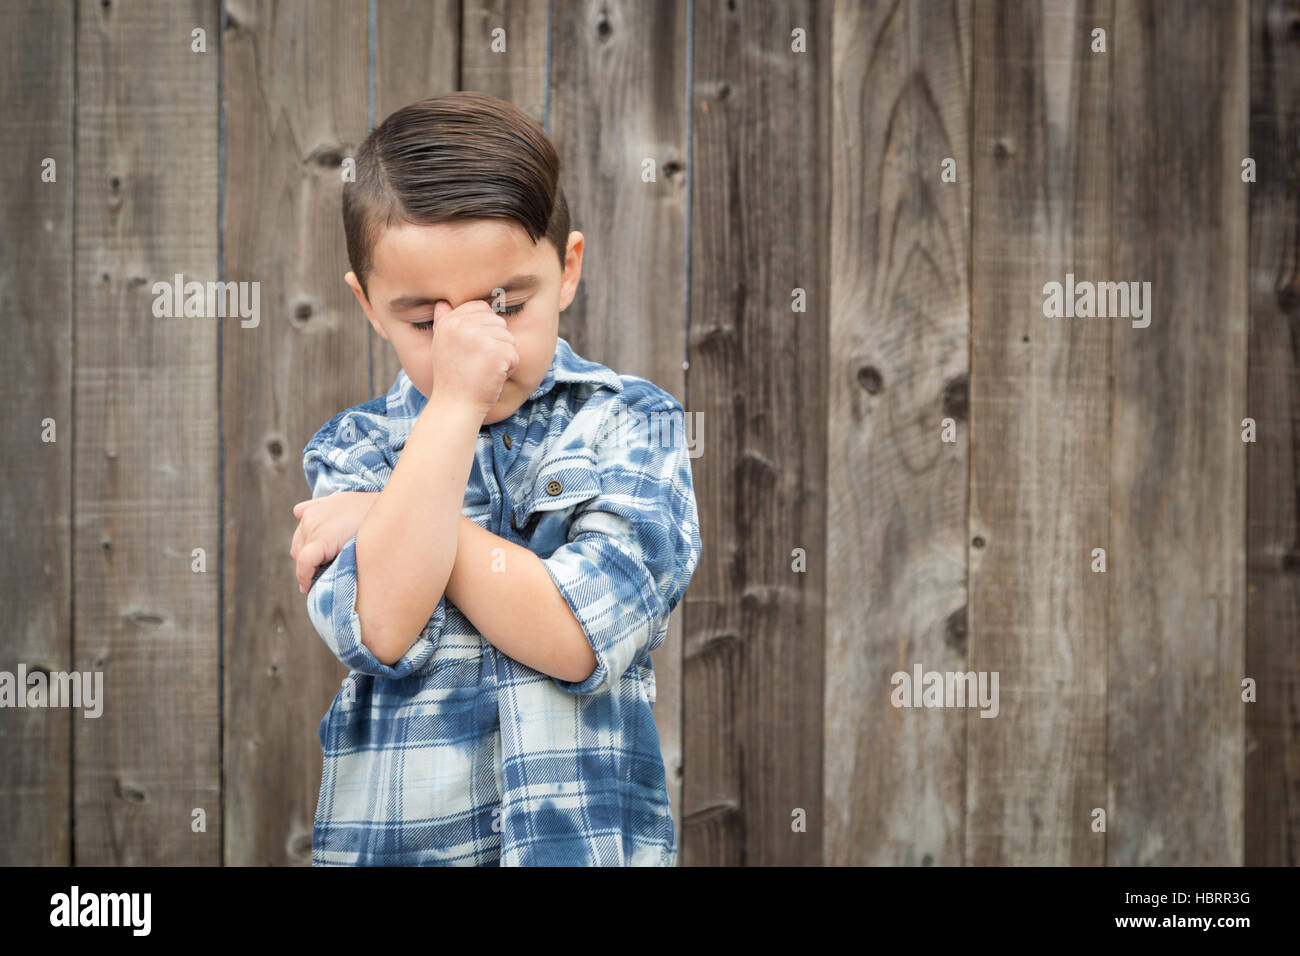 Young Frustrated Mixed Race Boy With Hand on Face Against Wooden Fence. Stock Photo